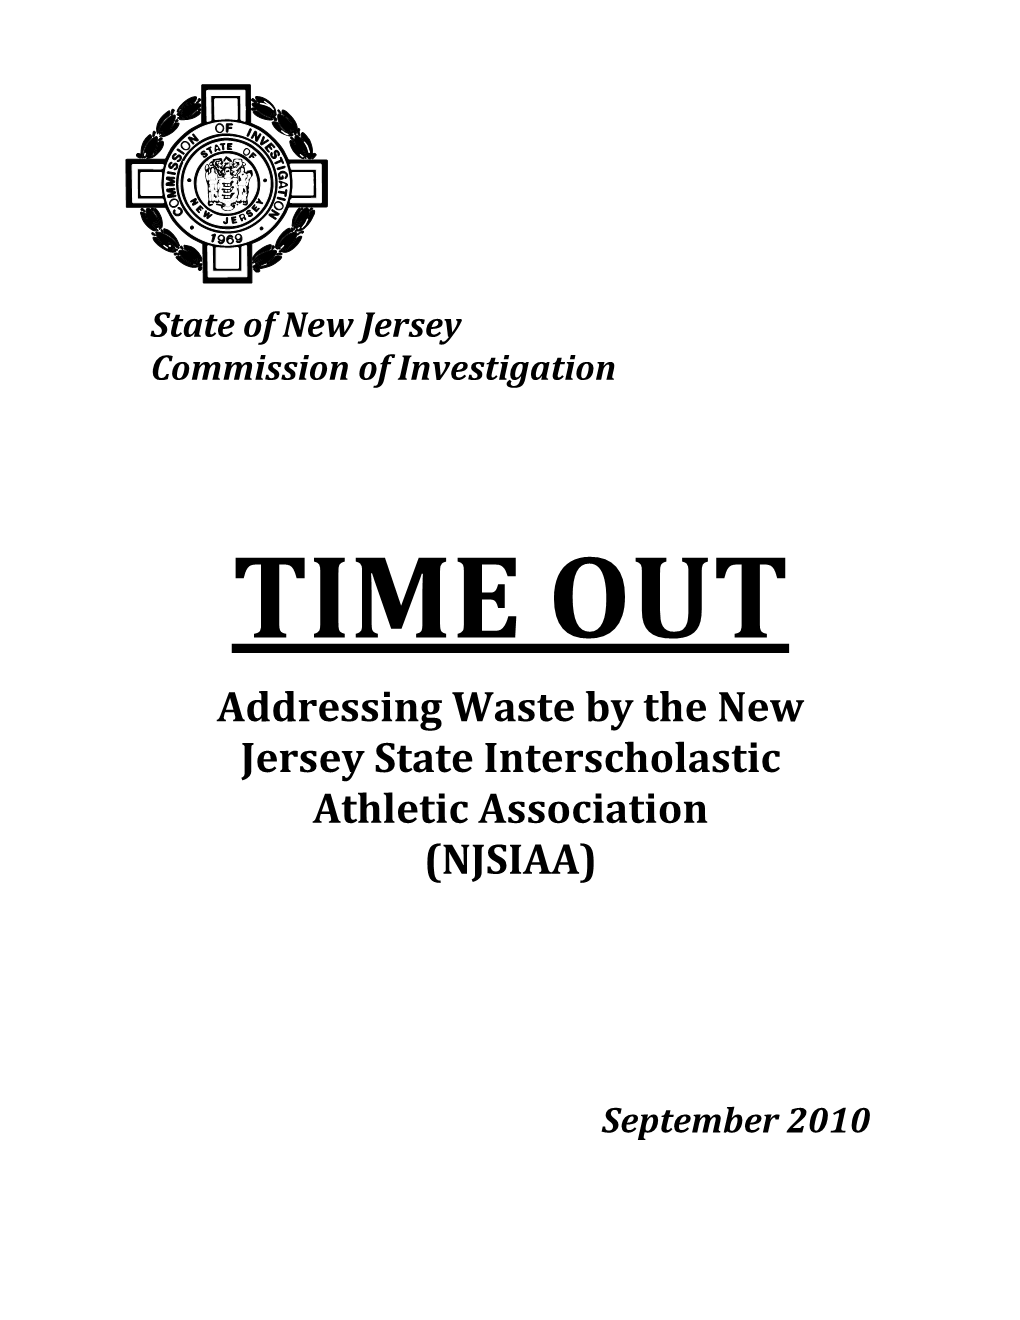 Time Out: Addressing Waste by the NJSIAA